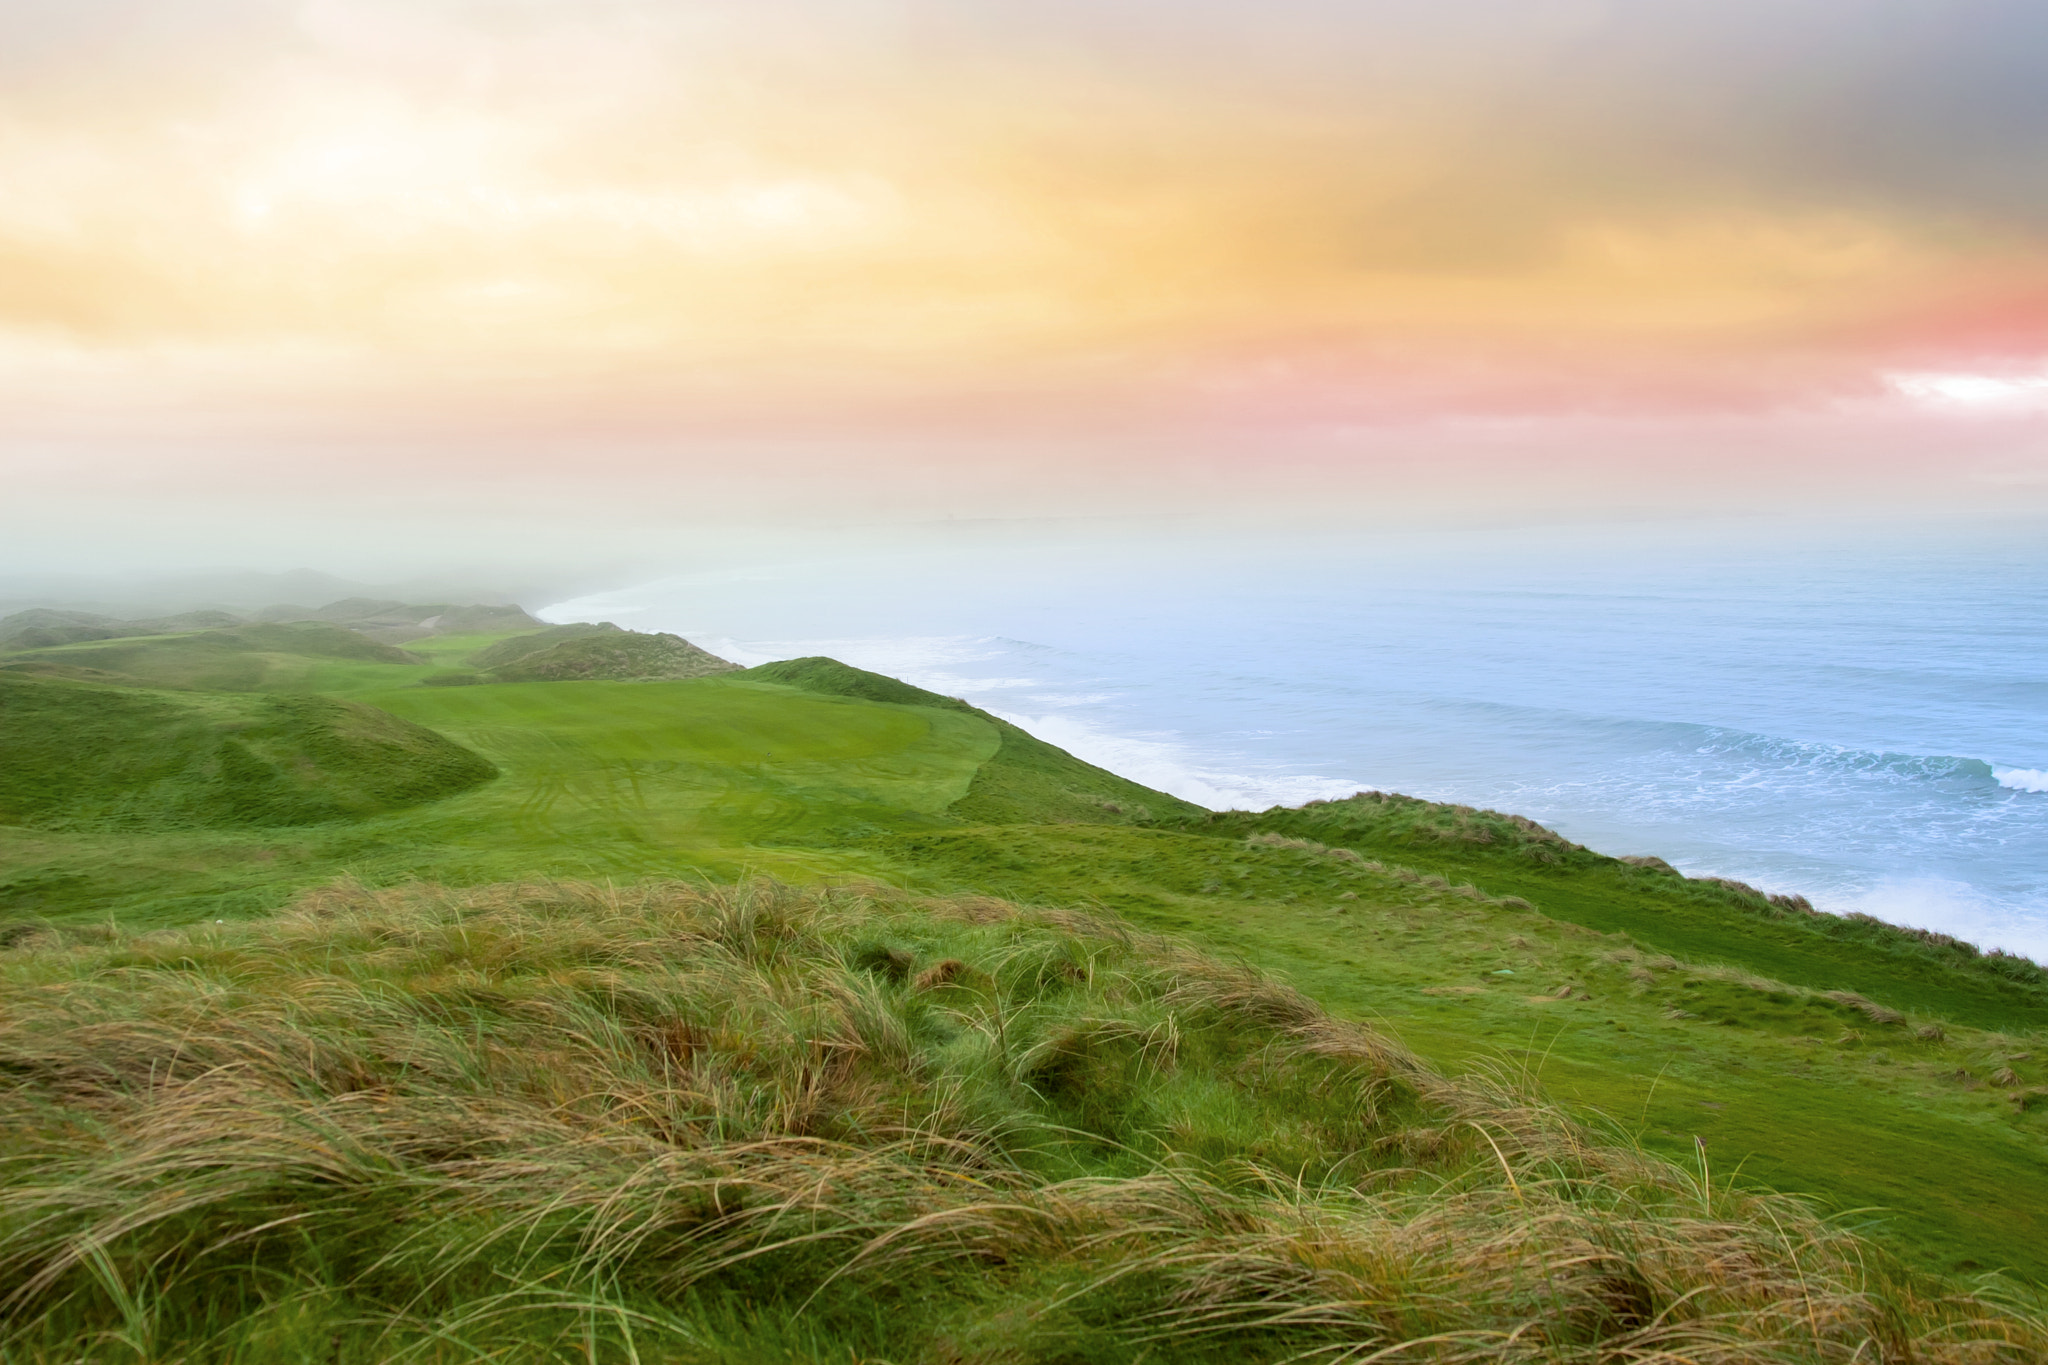 view of the Ballybunion links golf course